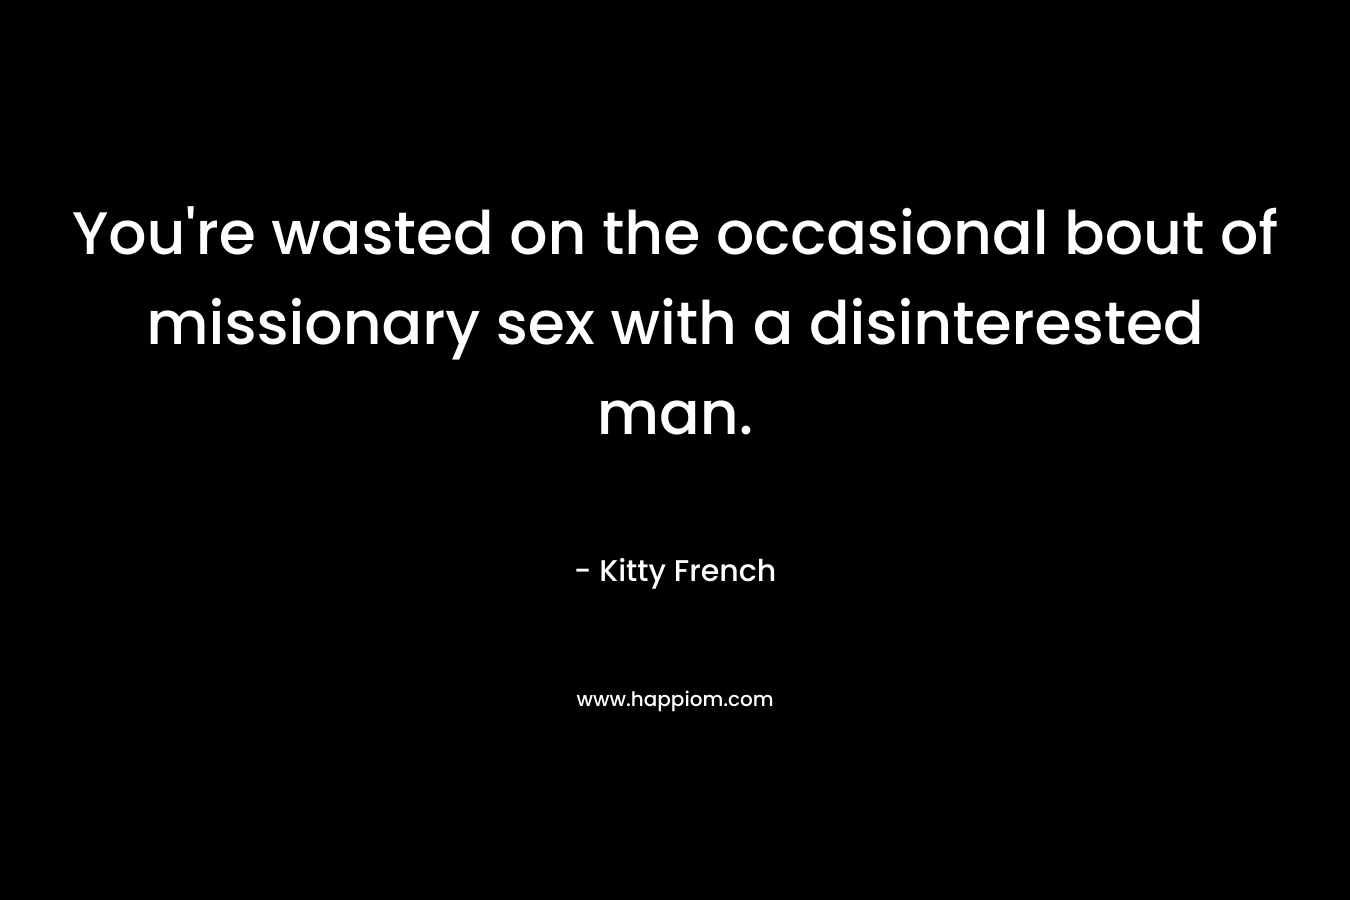 You're wasted on the occasional bout of missionary sex with a disinterested man.